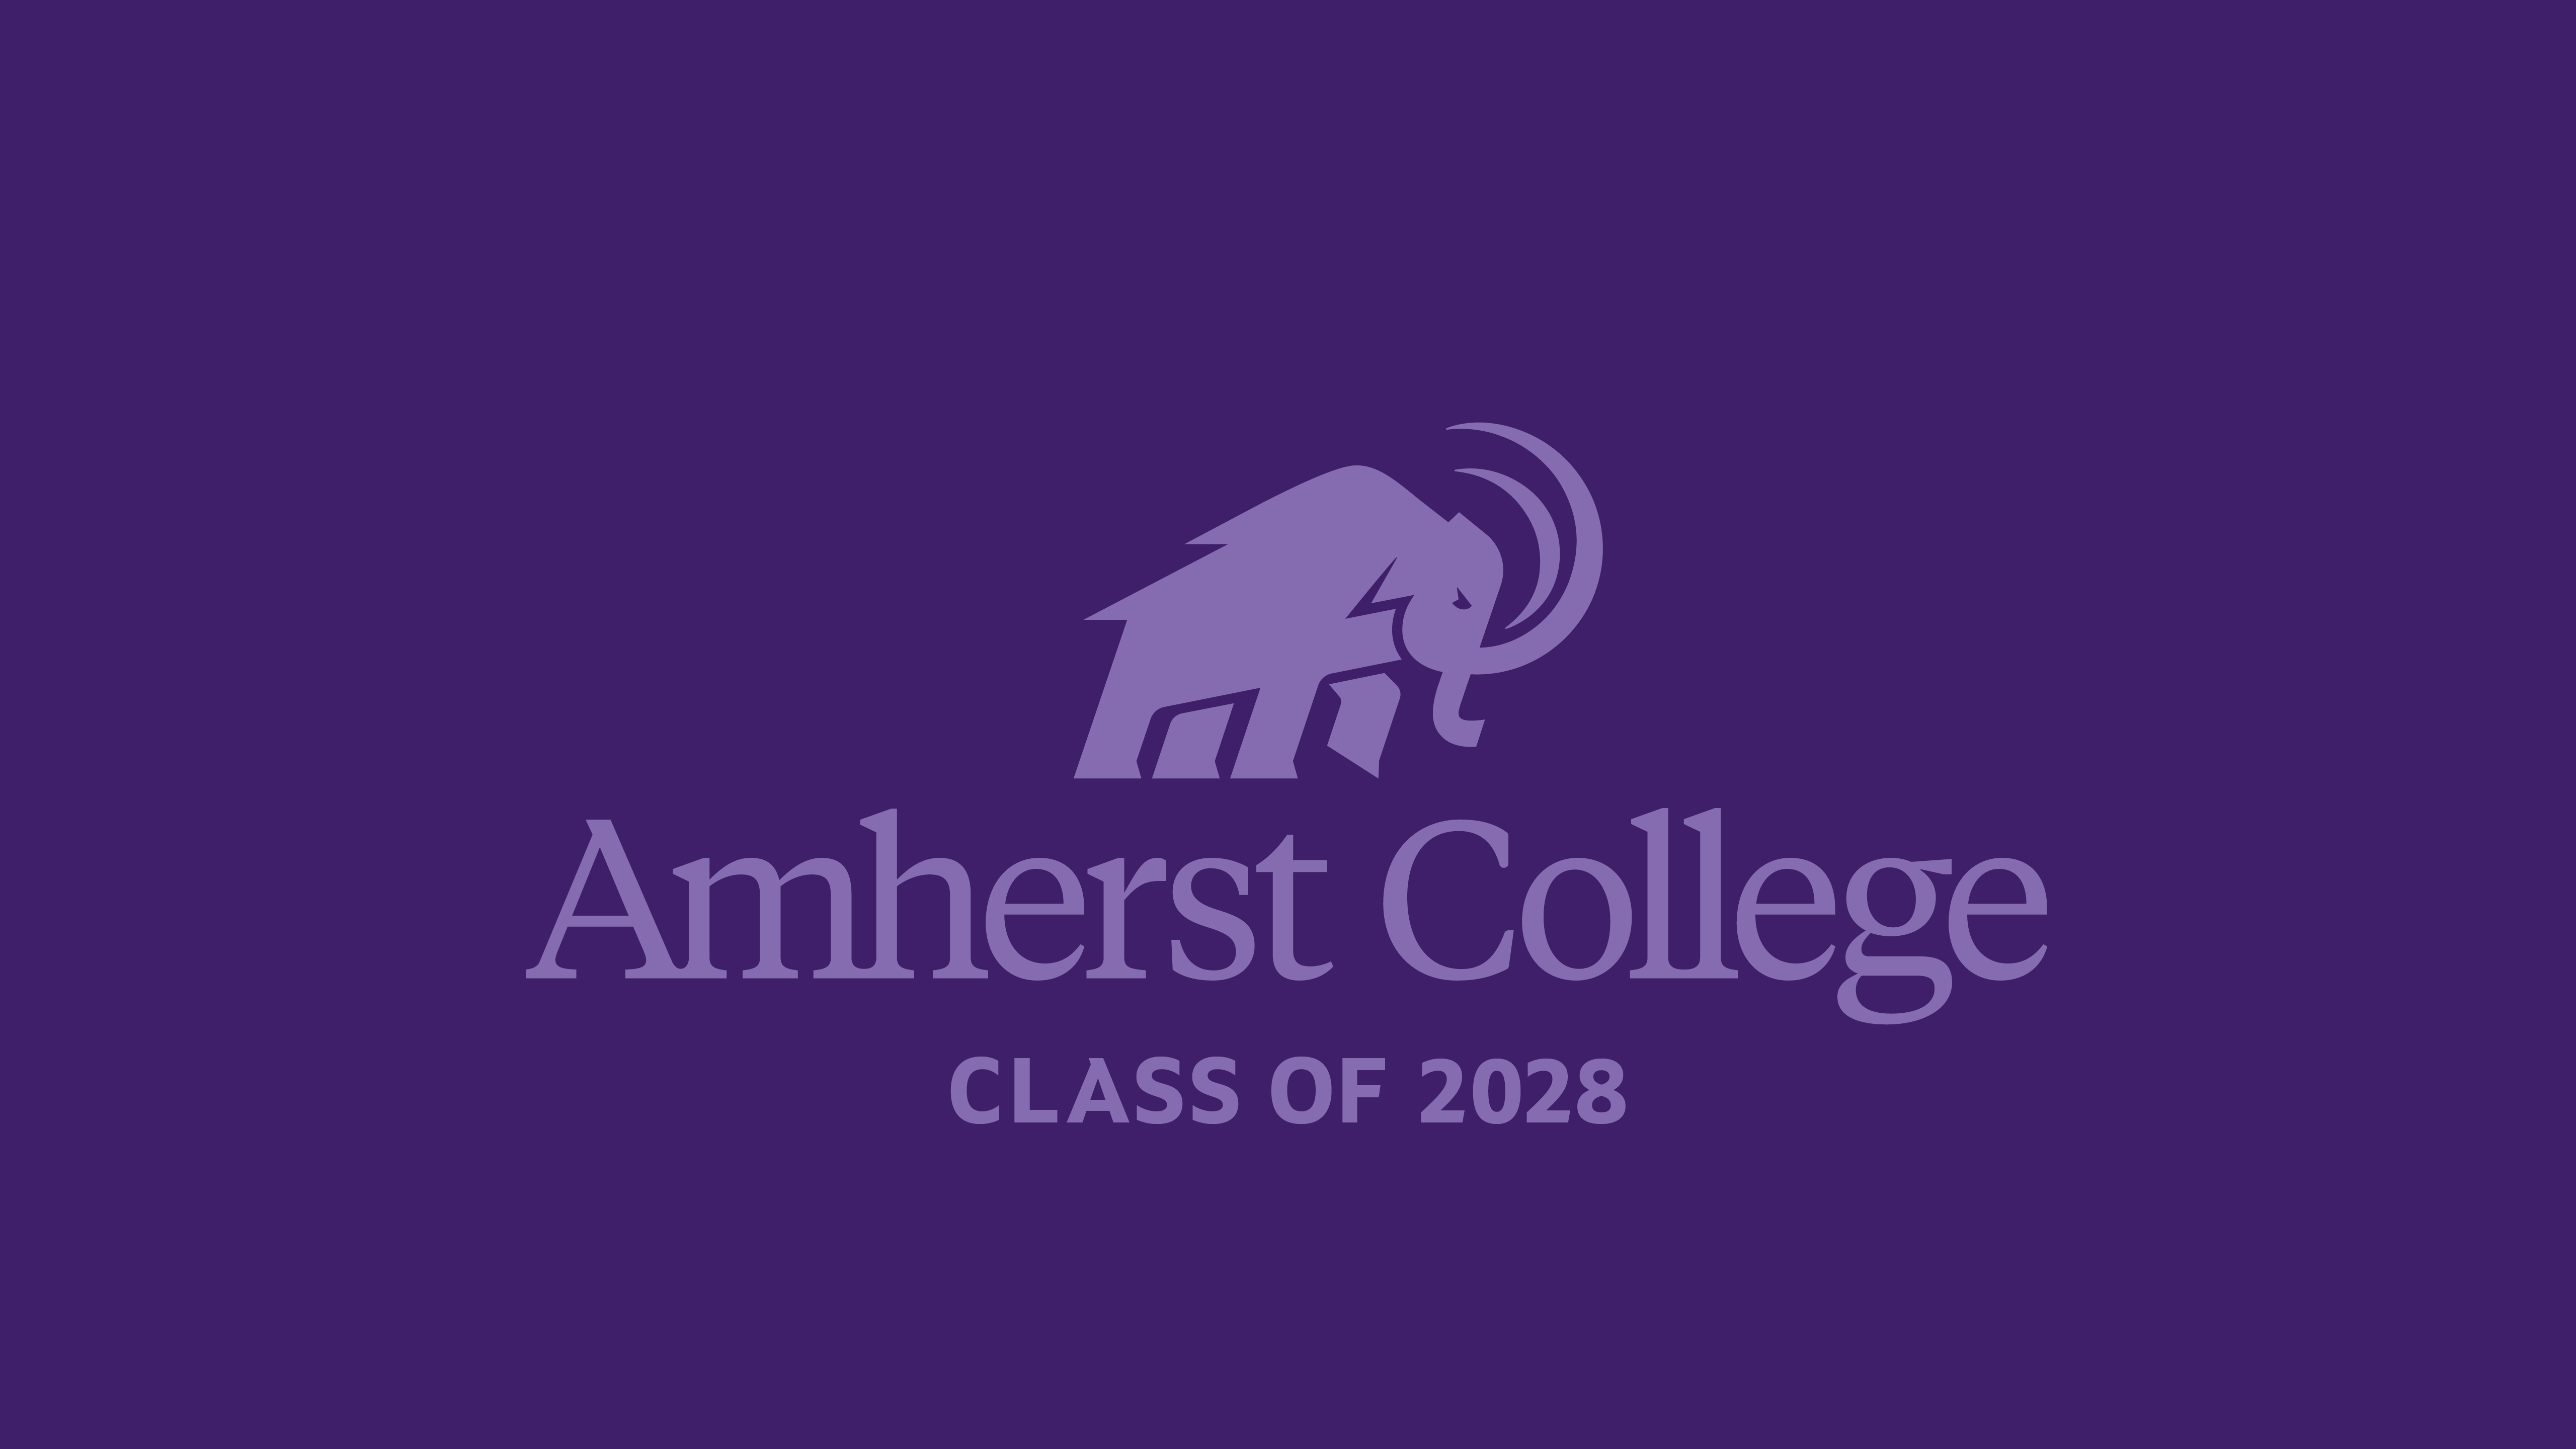 The Amherst Mammoth against a purple background with the words Amherst College Class of 2028